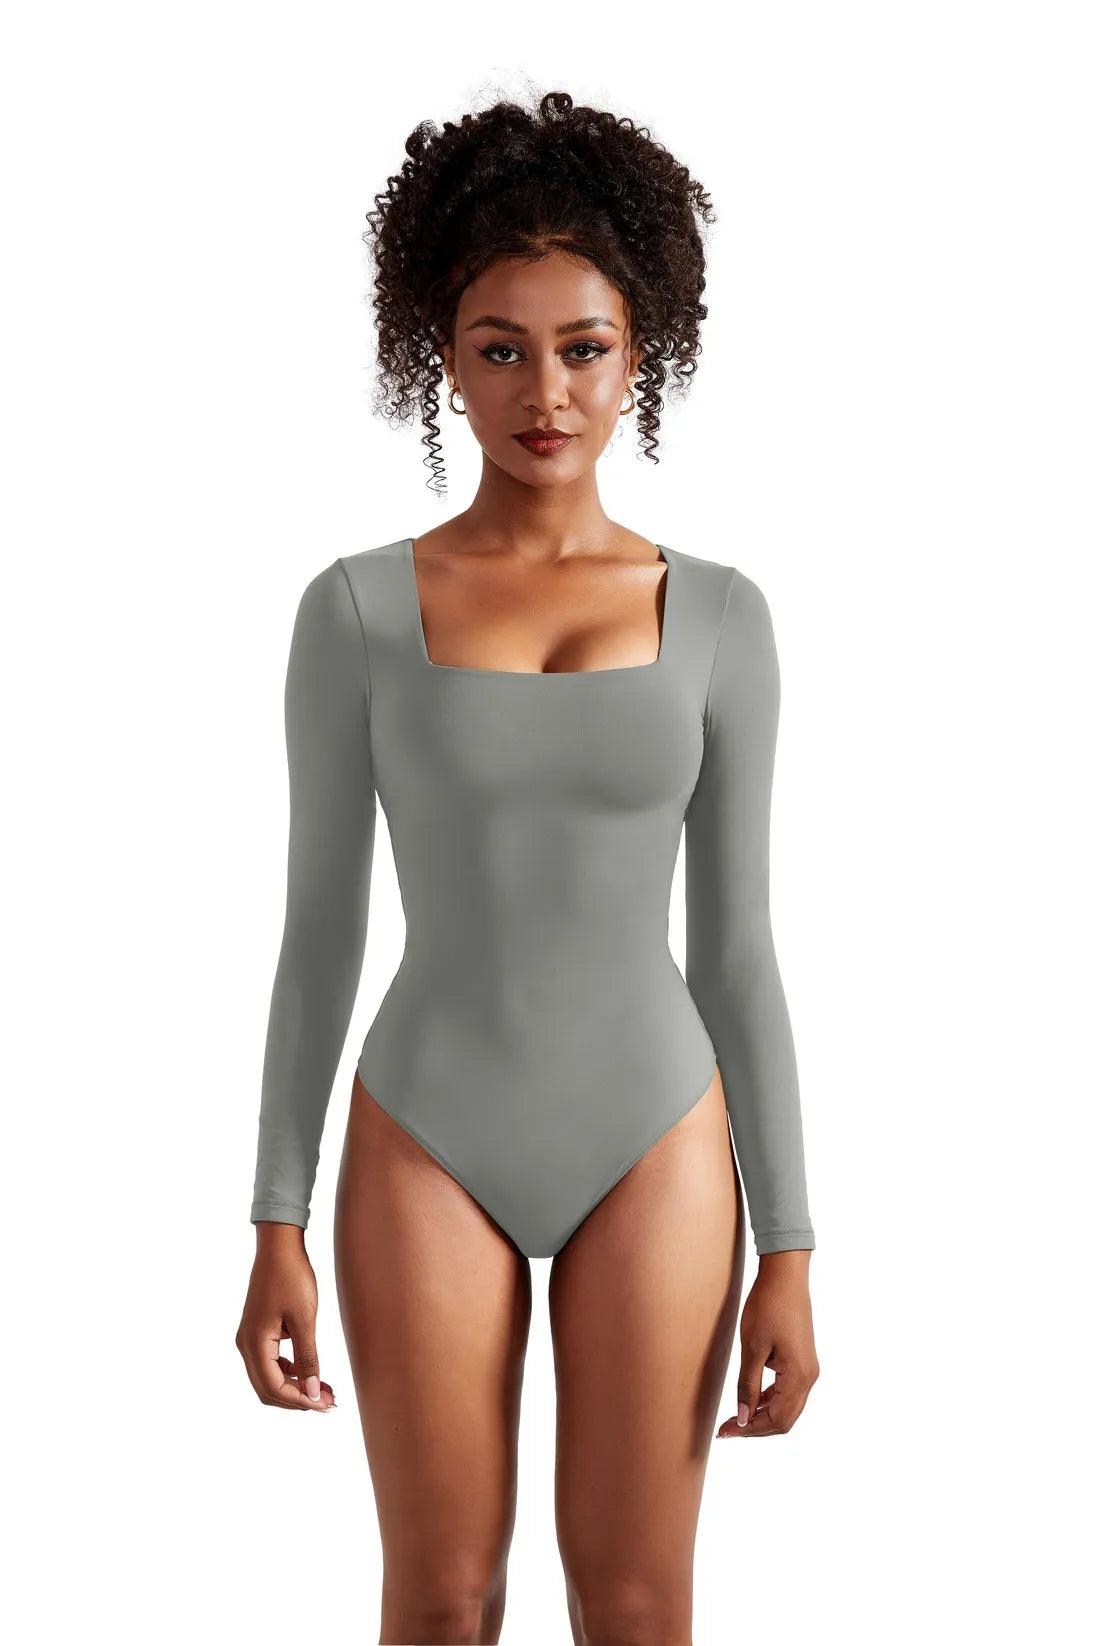 Buttery-Soft Women's Bodysuits from $20.79 Shipped for Prime